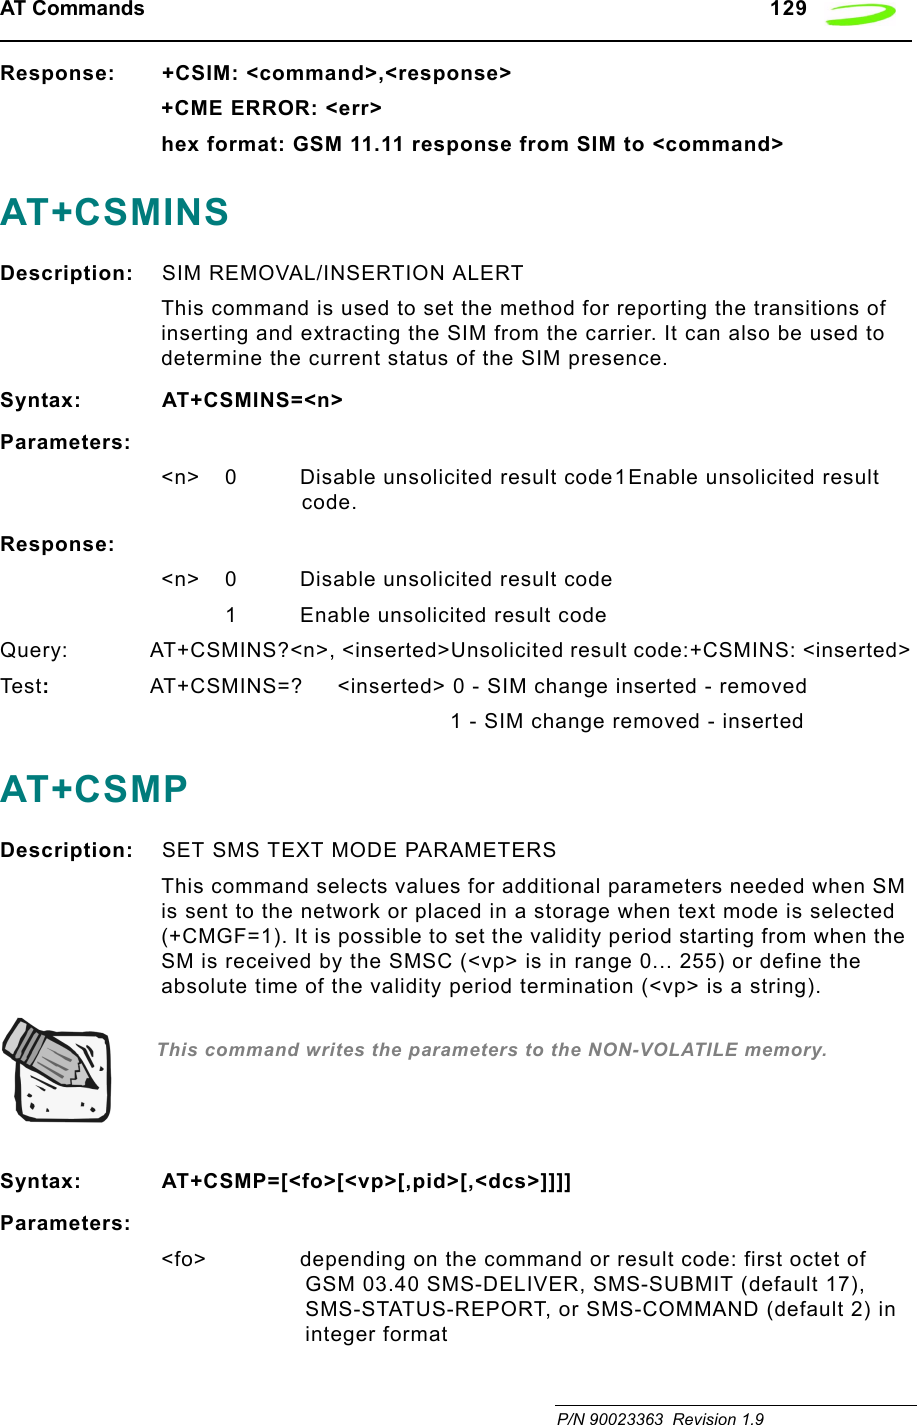 AT Commands   129 P/N 90023363  Revision 1.9Response: +CSIM: &lt;command&gt;,&lt;response&gt;+CME ERROR: &lt;err&gt;hex format: GSM 11.11 response from SIM to &lt;command&gt;AT+CSMINSDescription: SIM REMOVAL/INSERTION ALERTThis command is used to set the method for reporting the transitions of inserting and extracting the SIM from the carrier. It can also be used to determine the current status of the SIM presence.Syntax: AT+CSMINS=&lt;n&gt;Parameters:&lt;n&gt; 0 Disable unsolicited result code1Enable unsolicited result code.Response:&lt;n&gt; 0 Disable unsolicited result code1 Enable unsolicited result codeQuery: AT+CSMINS?&lt;n&gt;, &lt;inserted&gt;Unsolicited result code:+CSMINS: &lt;inserted&gt;Tes t:  AT+CSMINS=?     &lt;inserted&gt; 0 - SIM change inserted - removed1 - SIM change removed - insertedAT+CSMPDescription: SET SMS TEXT MODE PARAMETERSThis command selects values for additional parameters needed when SM is sent to the network or placed in a storage when text mode is selected (+CMGF=1). It is possible to set the validity period starting from when the SM is received by the SMSC (&lt;vp&gt; is in range 0... 255) or define the absolute time of the validity period termination (&lt;vp&gt; is a string).  This command writes the parameters to the NON-VOLATILE memory.Syntax: AT+CSMP=[&lt;fo&gt;[&lt;vp&gt;[,pid&gt;[,&lt;dcs&gt;]]]]Parameters:&lt;fo&gt; depending on the command or result code: first octet of GSM 03.40 SMS-DELIVER, SMS-SUBMIT (default 17), SMS-STATUS-REPORT, or SMS-COMMAND (default 2) in integer format